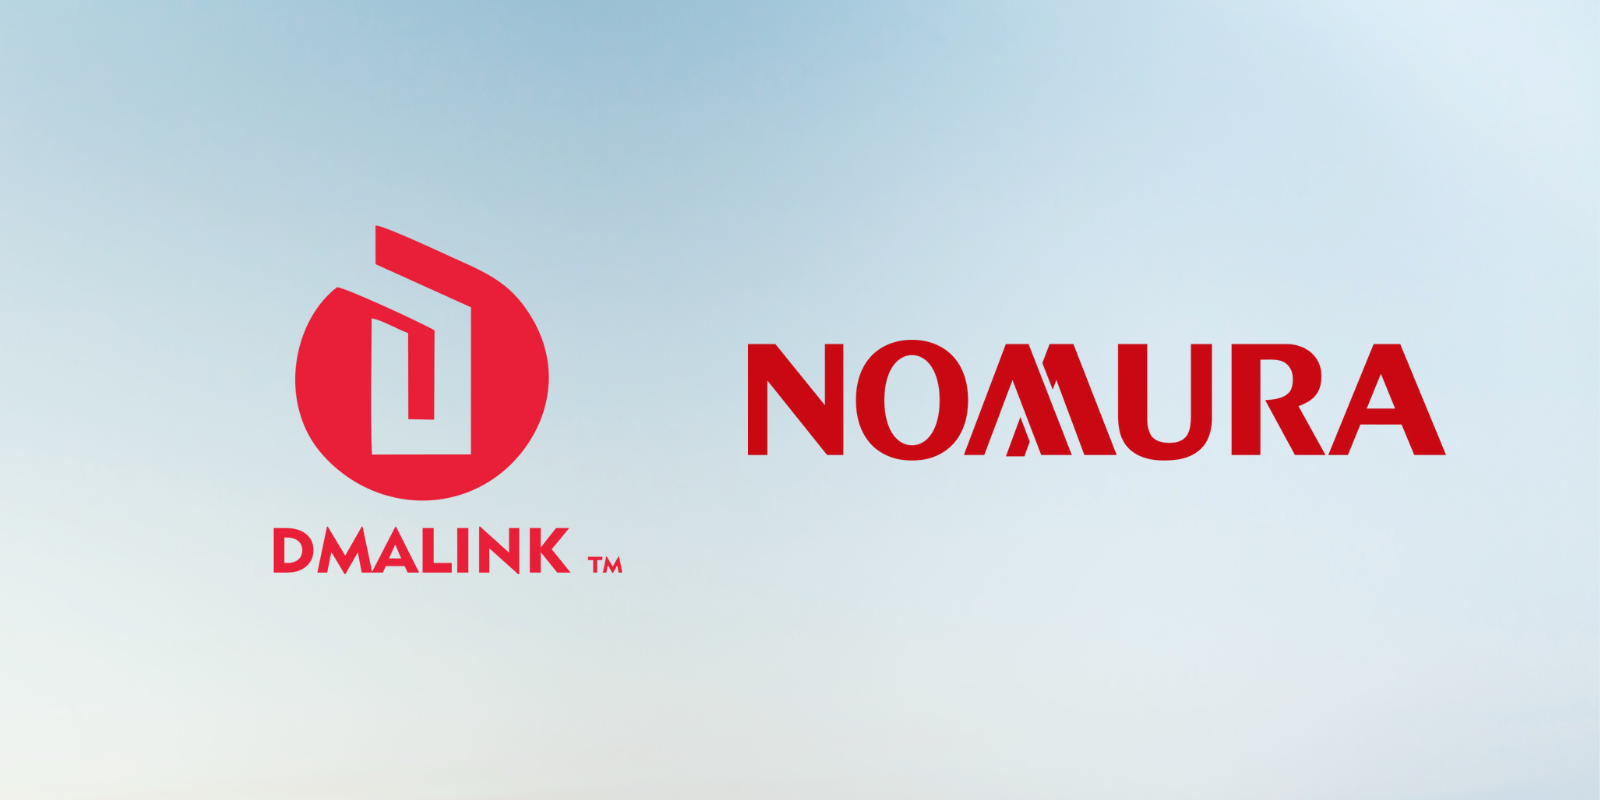 DMALINK adds Nomura to bolster its Asia eFX book